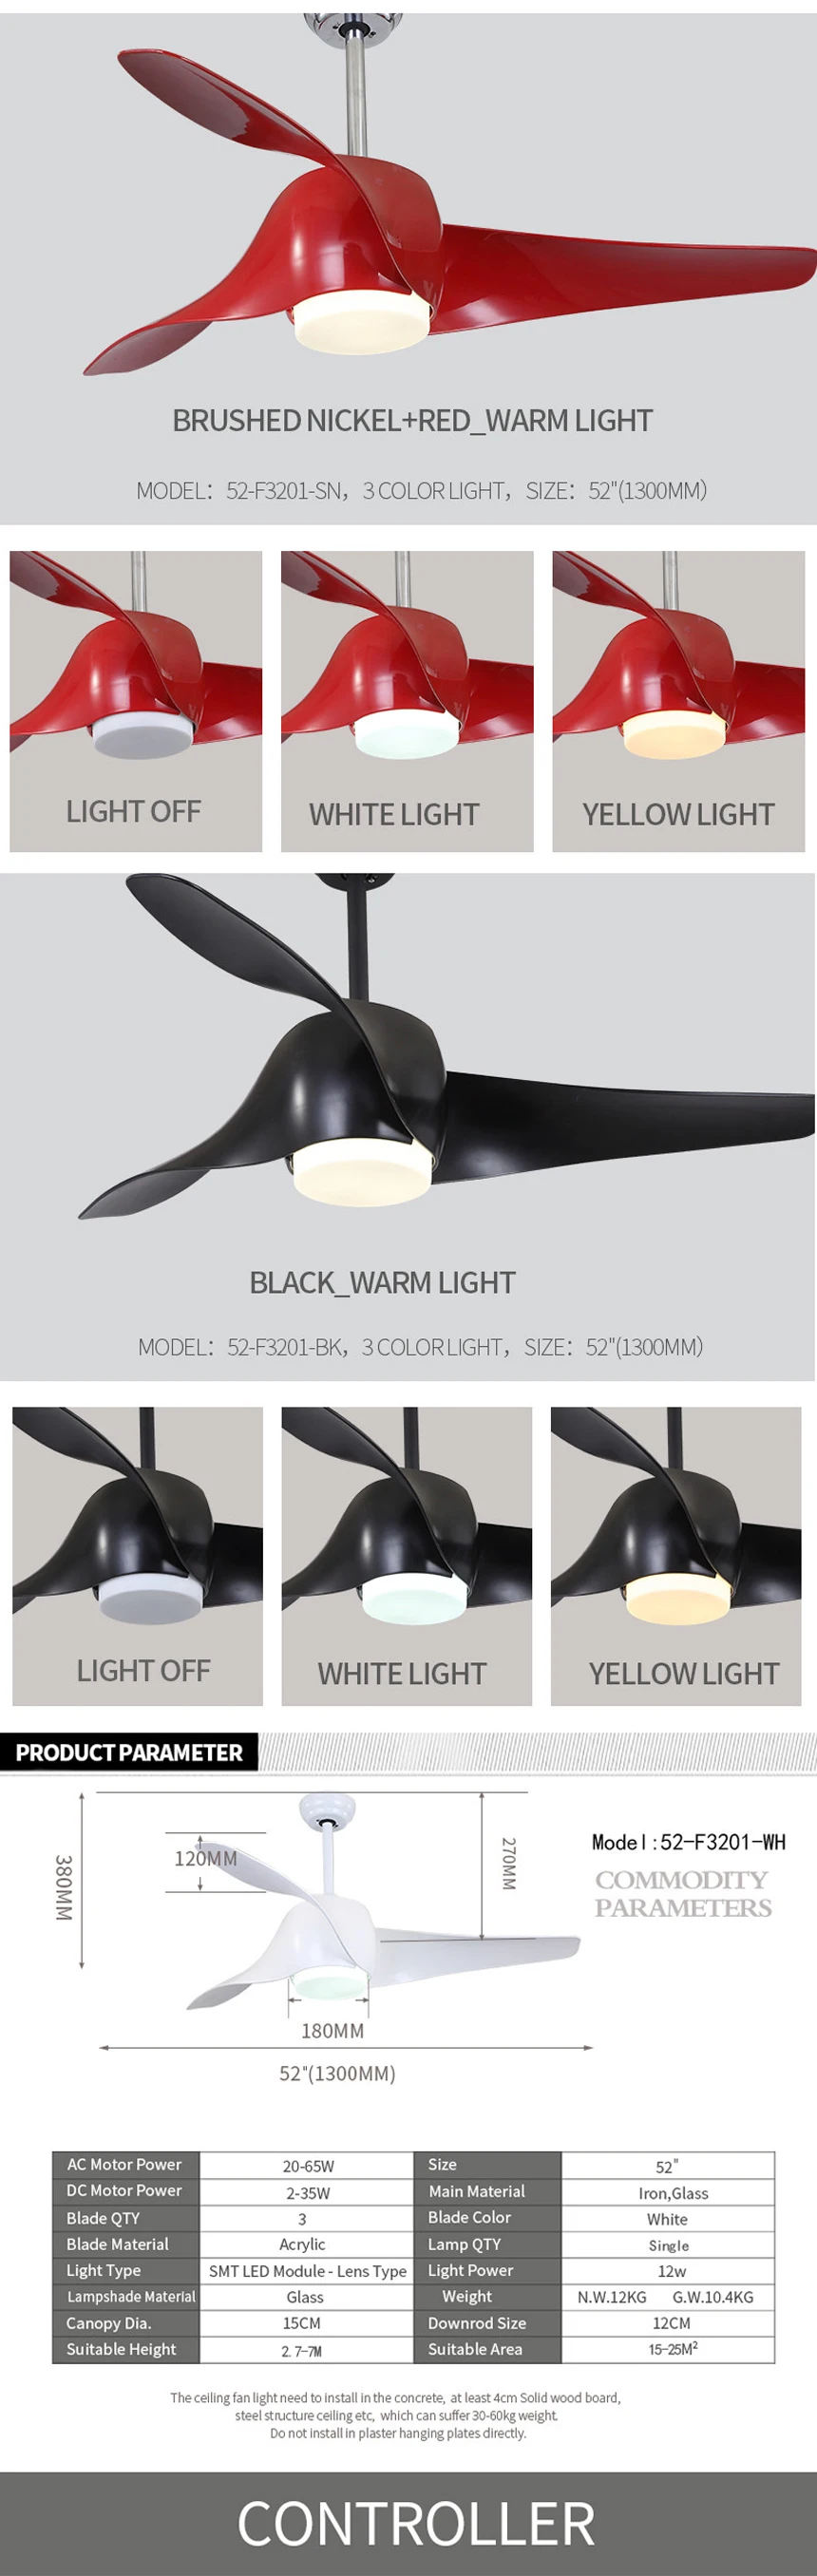 Multi-function modern design high quality energy saving electric fan with light